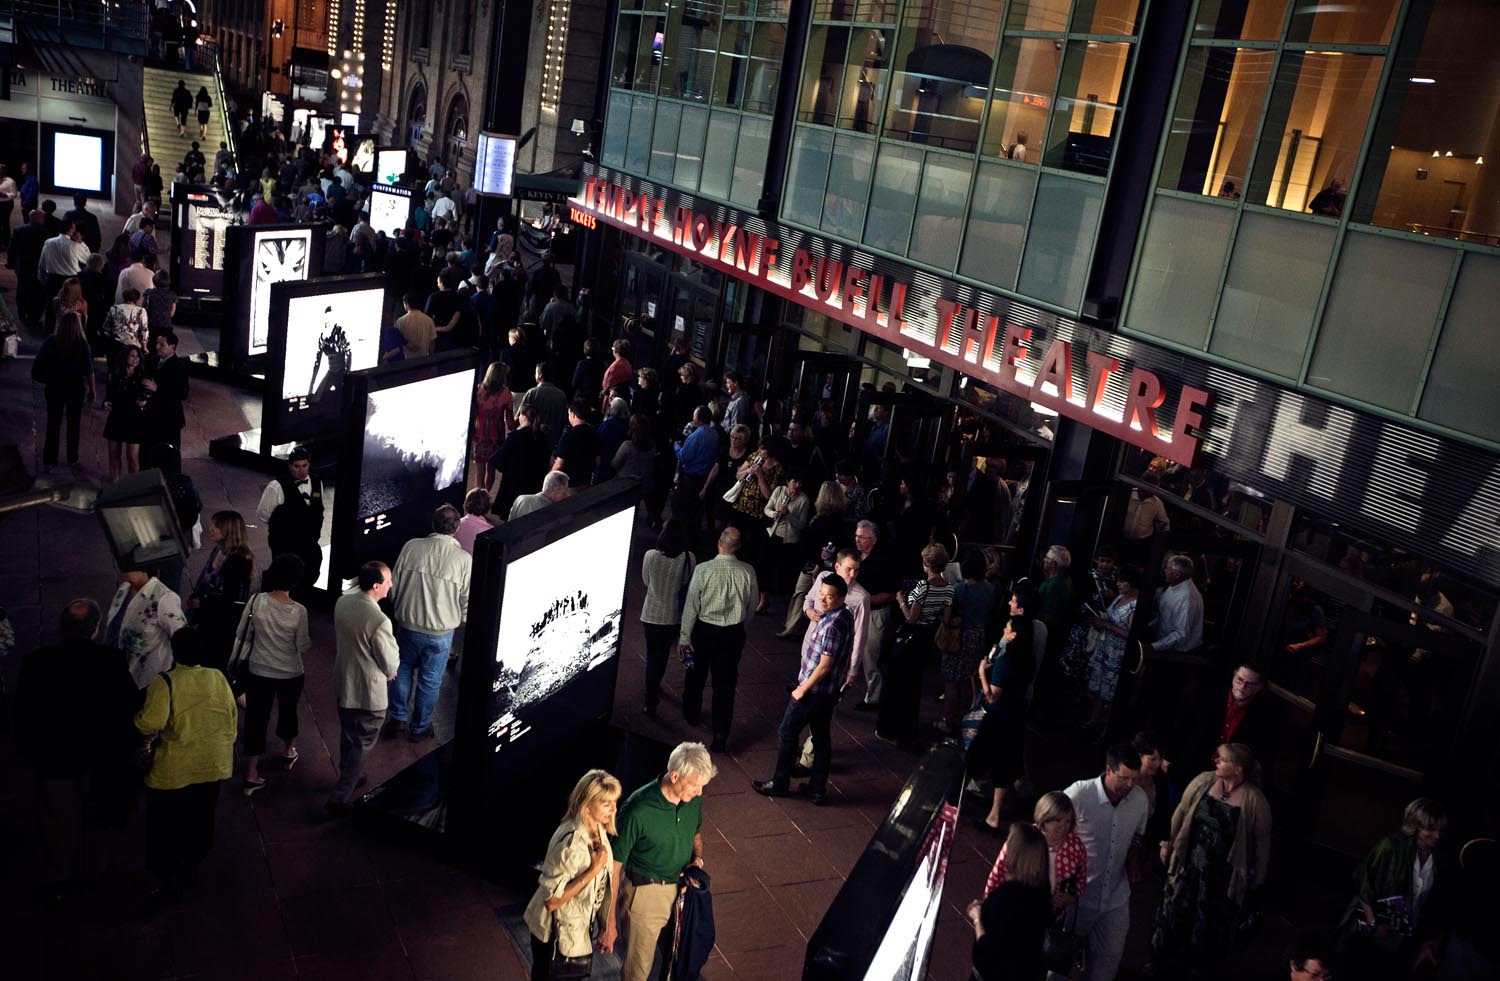 The 2010 Red Bull Illume Photo Exhibition